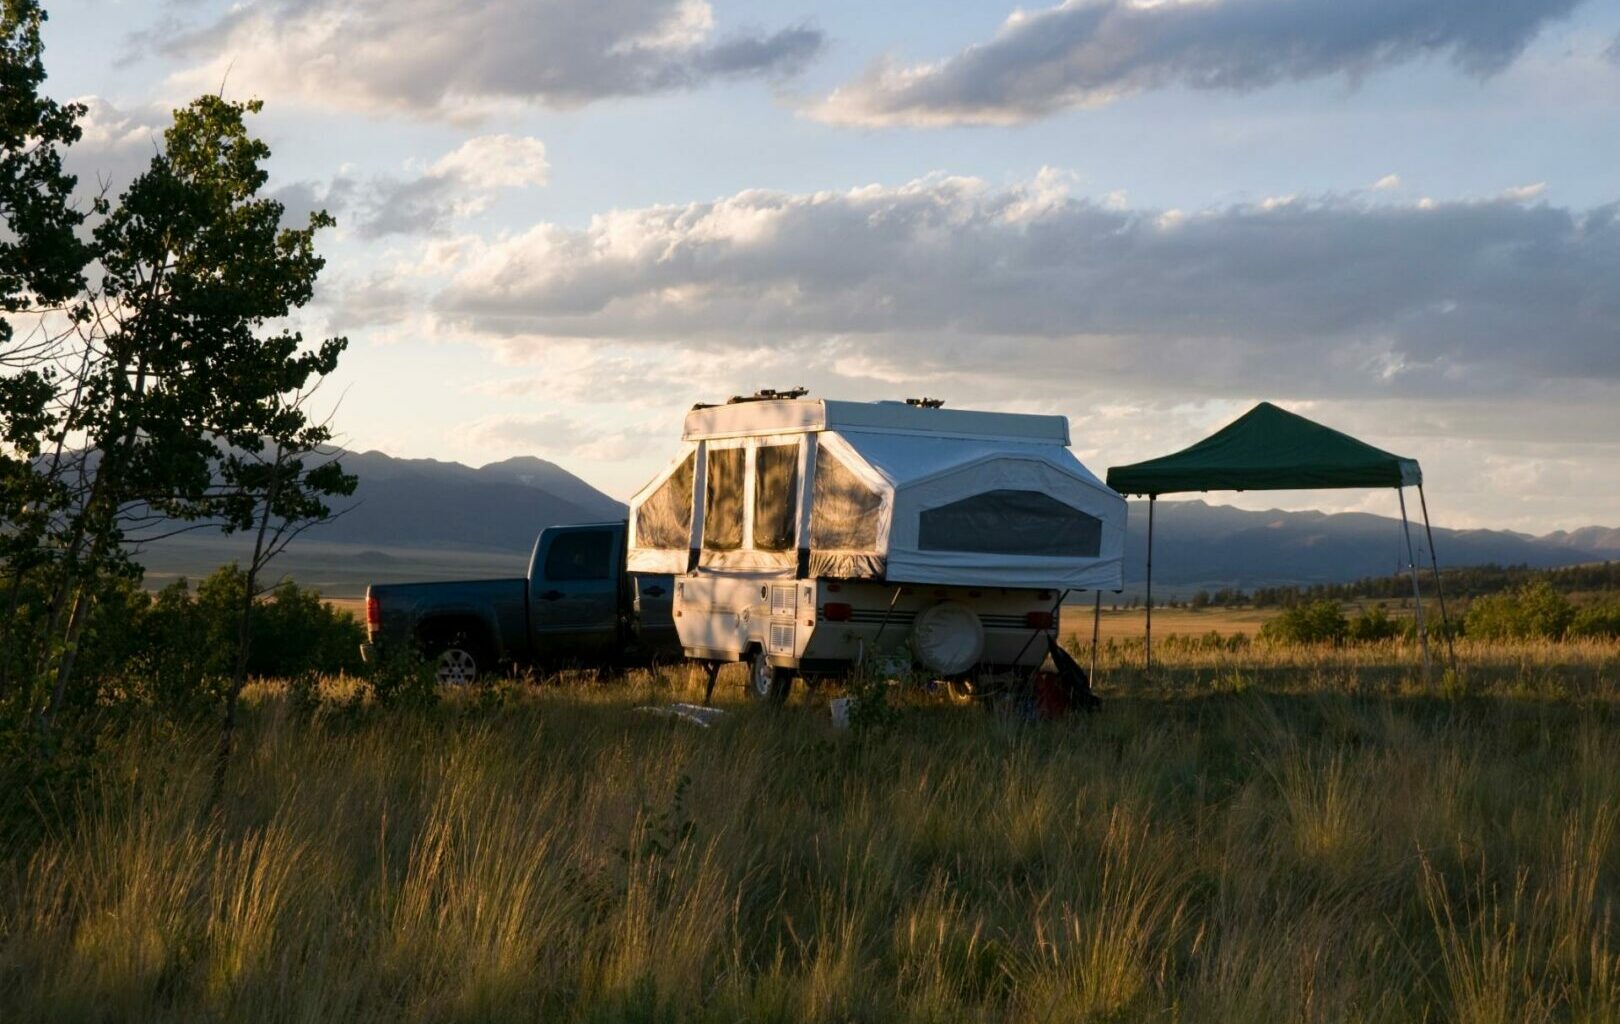 A pop-up camper camps out in a field next to its tow vehicle and canopy